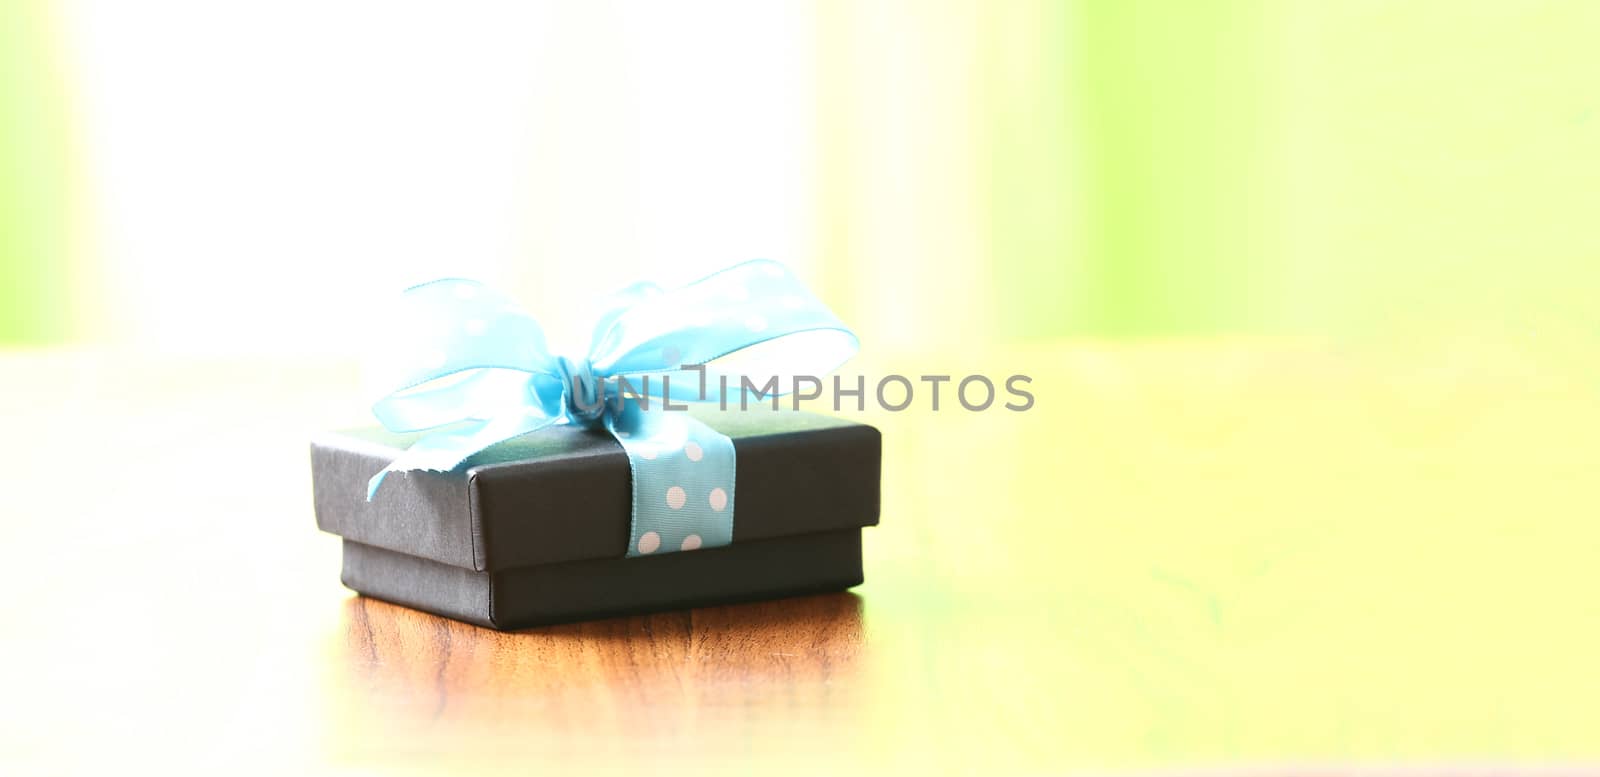 presents in a table with decoration and copy space